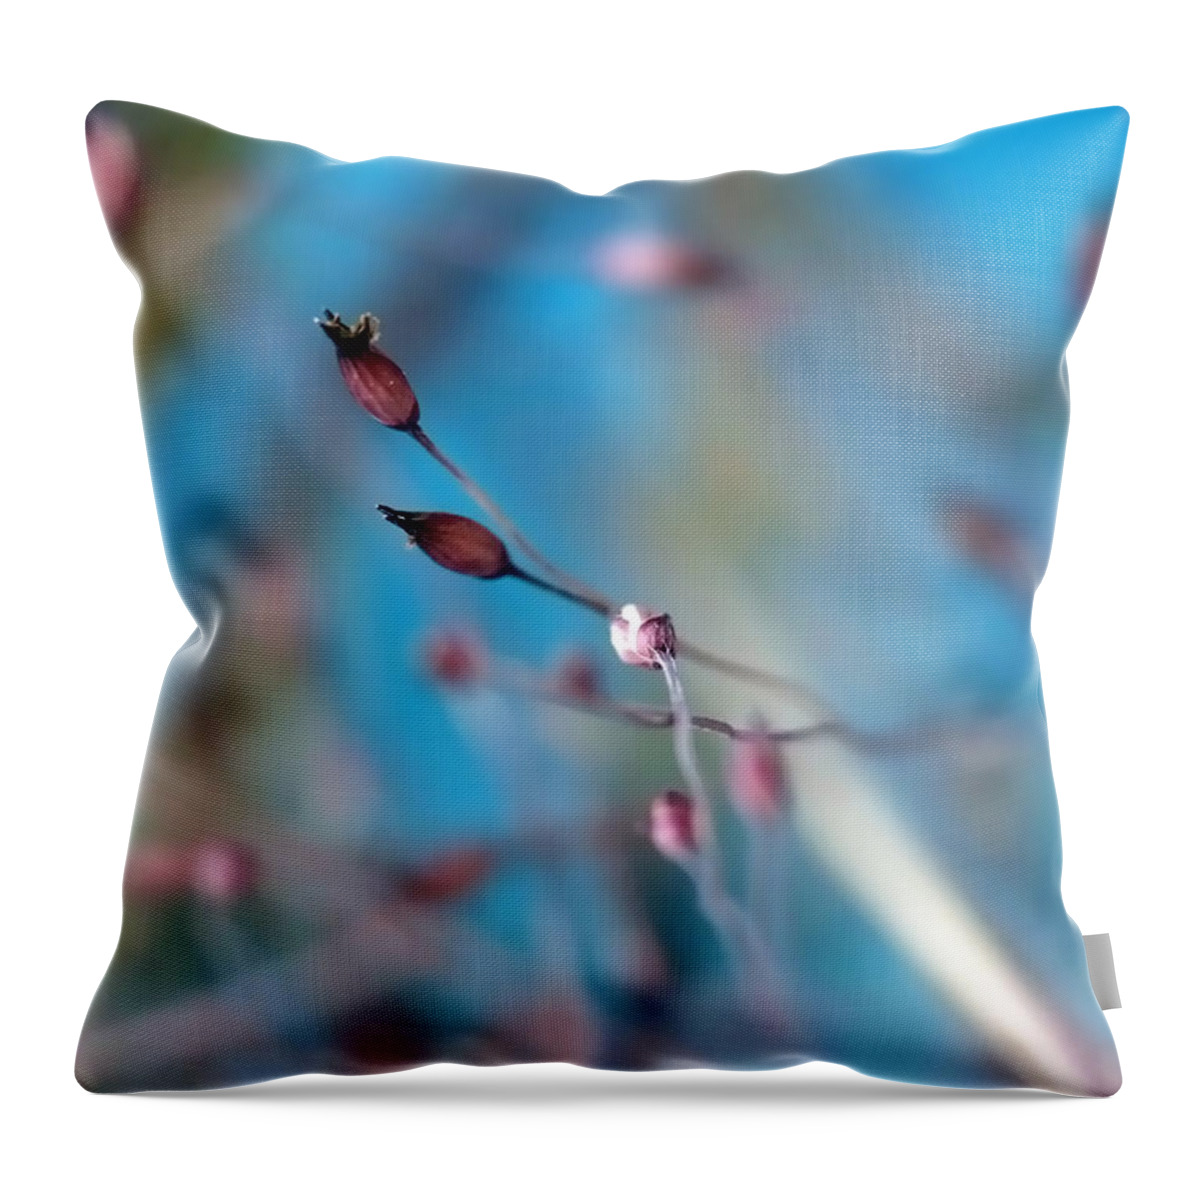 Abstract Throw Pillow featuring the photograph Emerge by Lauren Radke